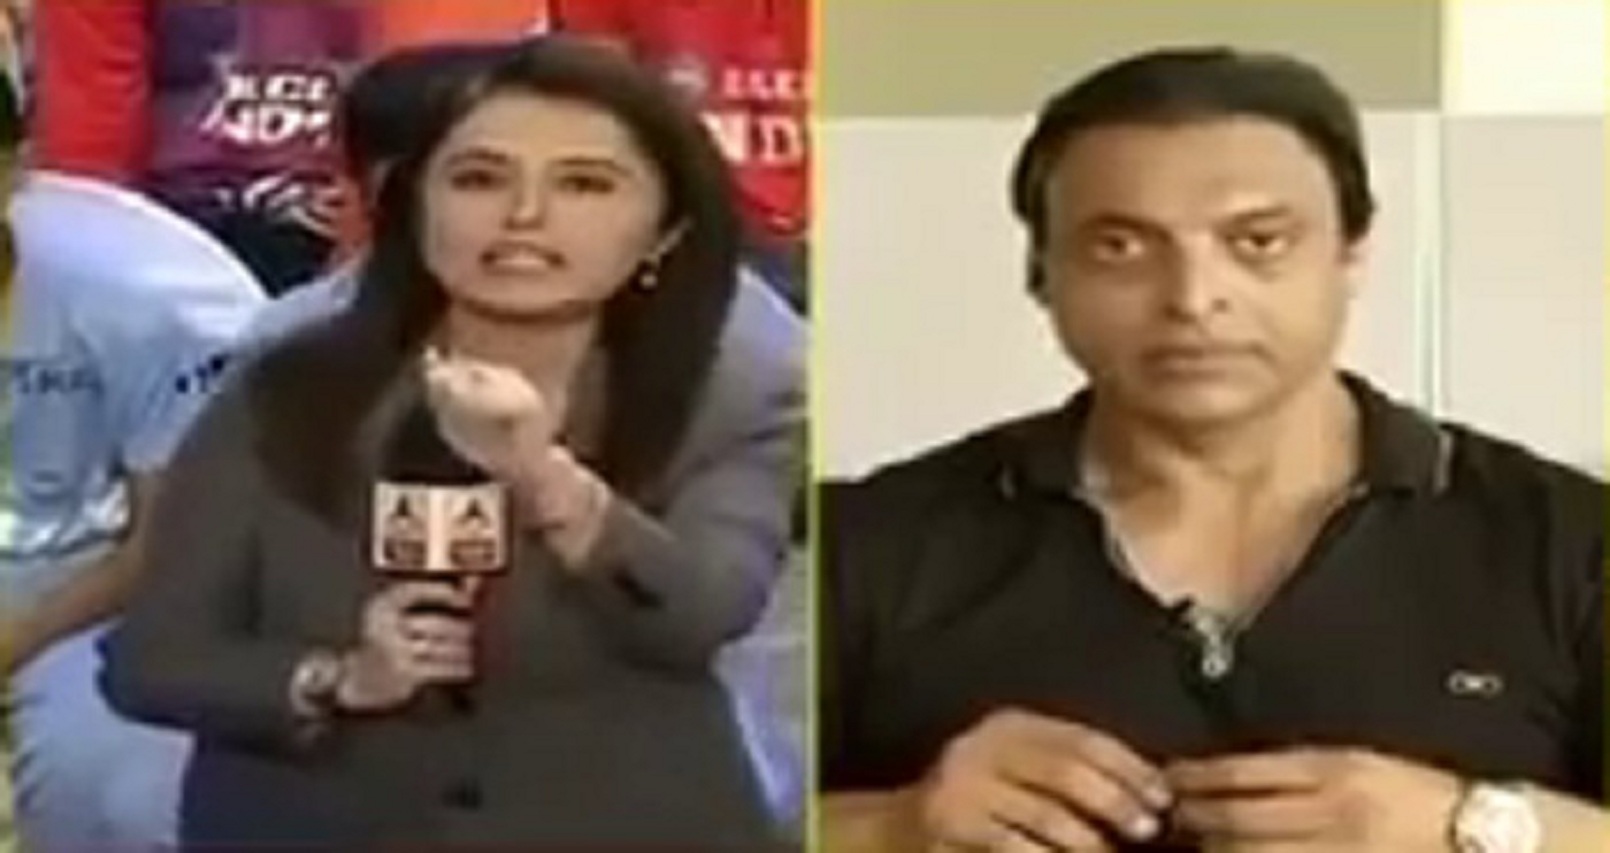 Shoaib Akhtar Gets Angry at Reporter Over Her Language After Pakistan’s Loss